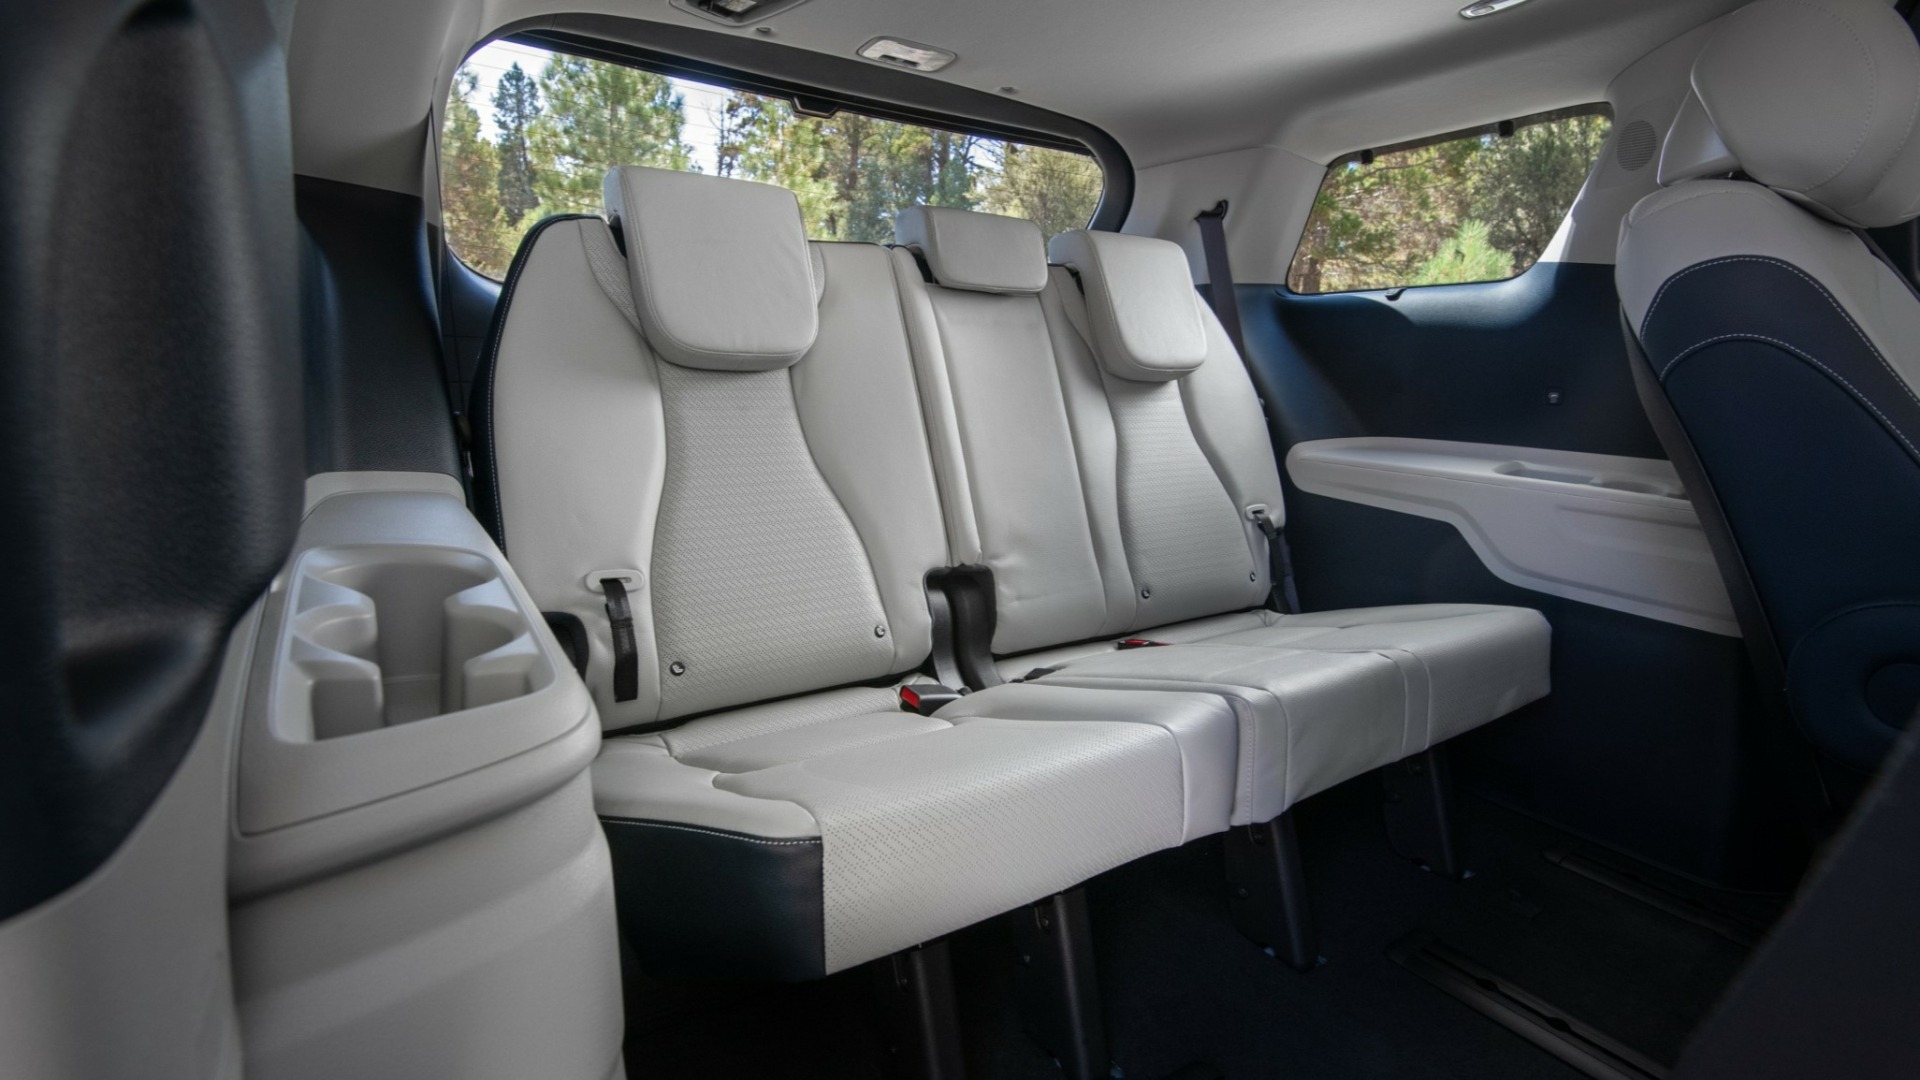 The Rear Seats That Is Available In The 2025 Kia Carnival (Credis Kia)